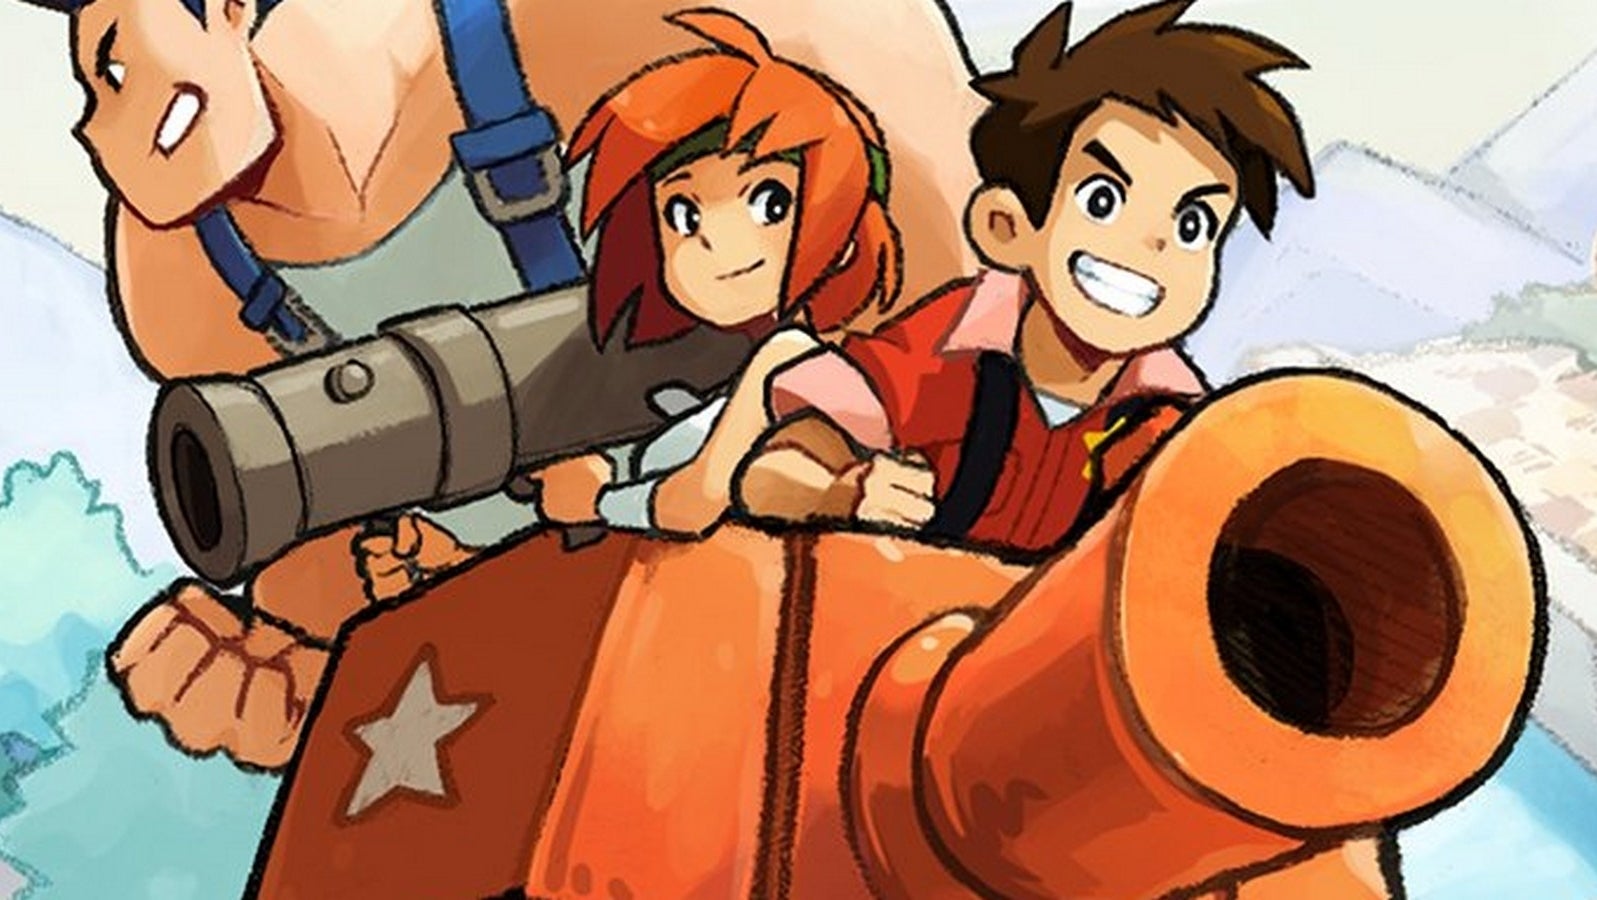 Image for Switch Advance Wars remake delayed into 2022